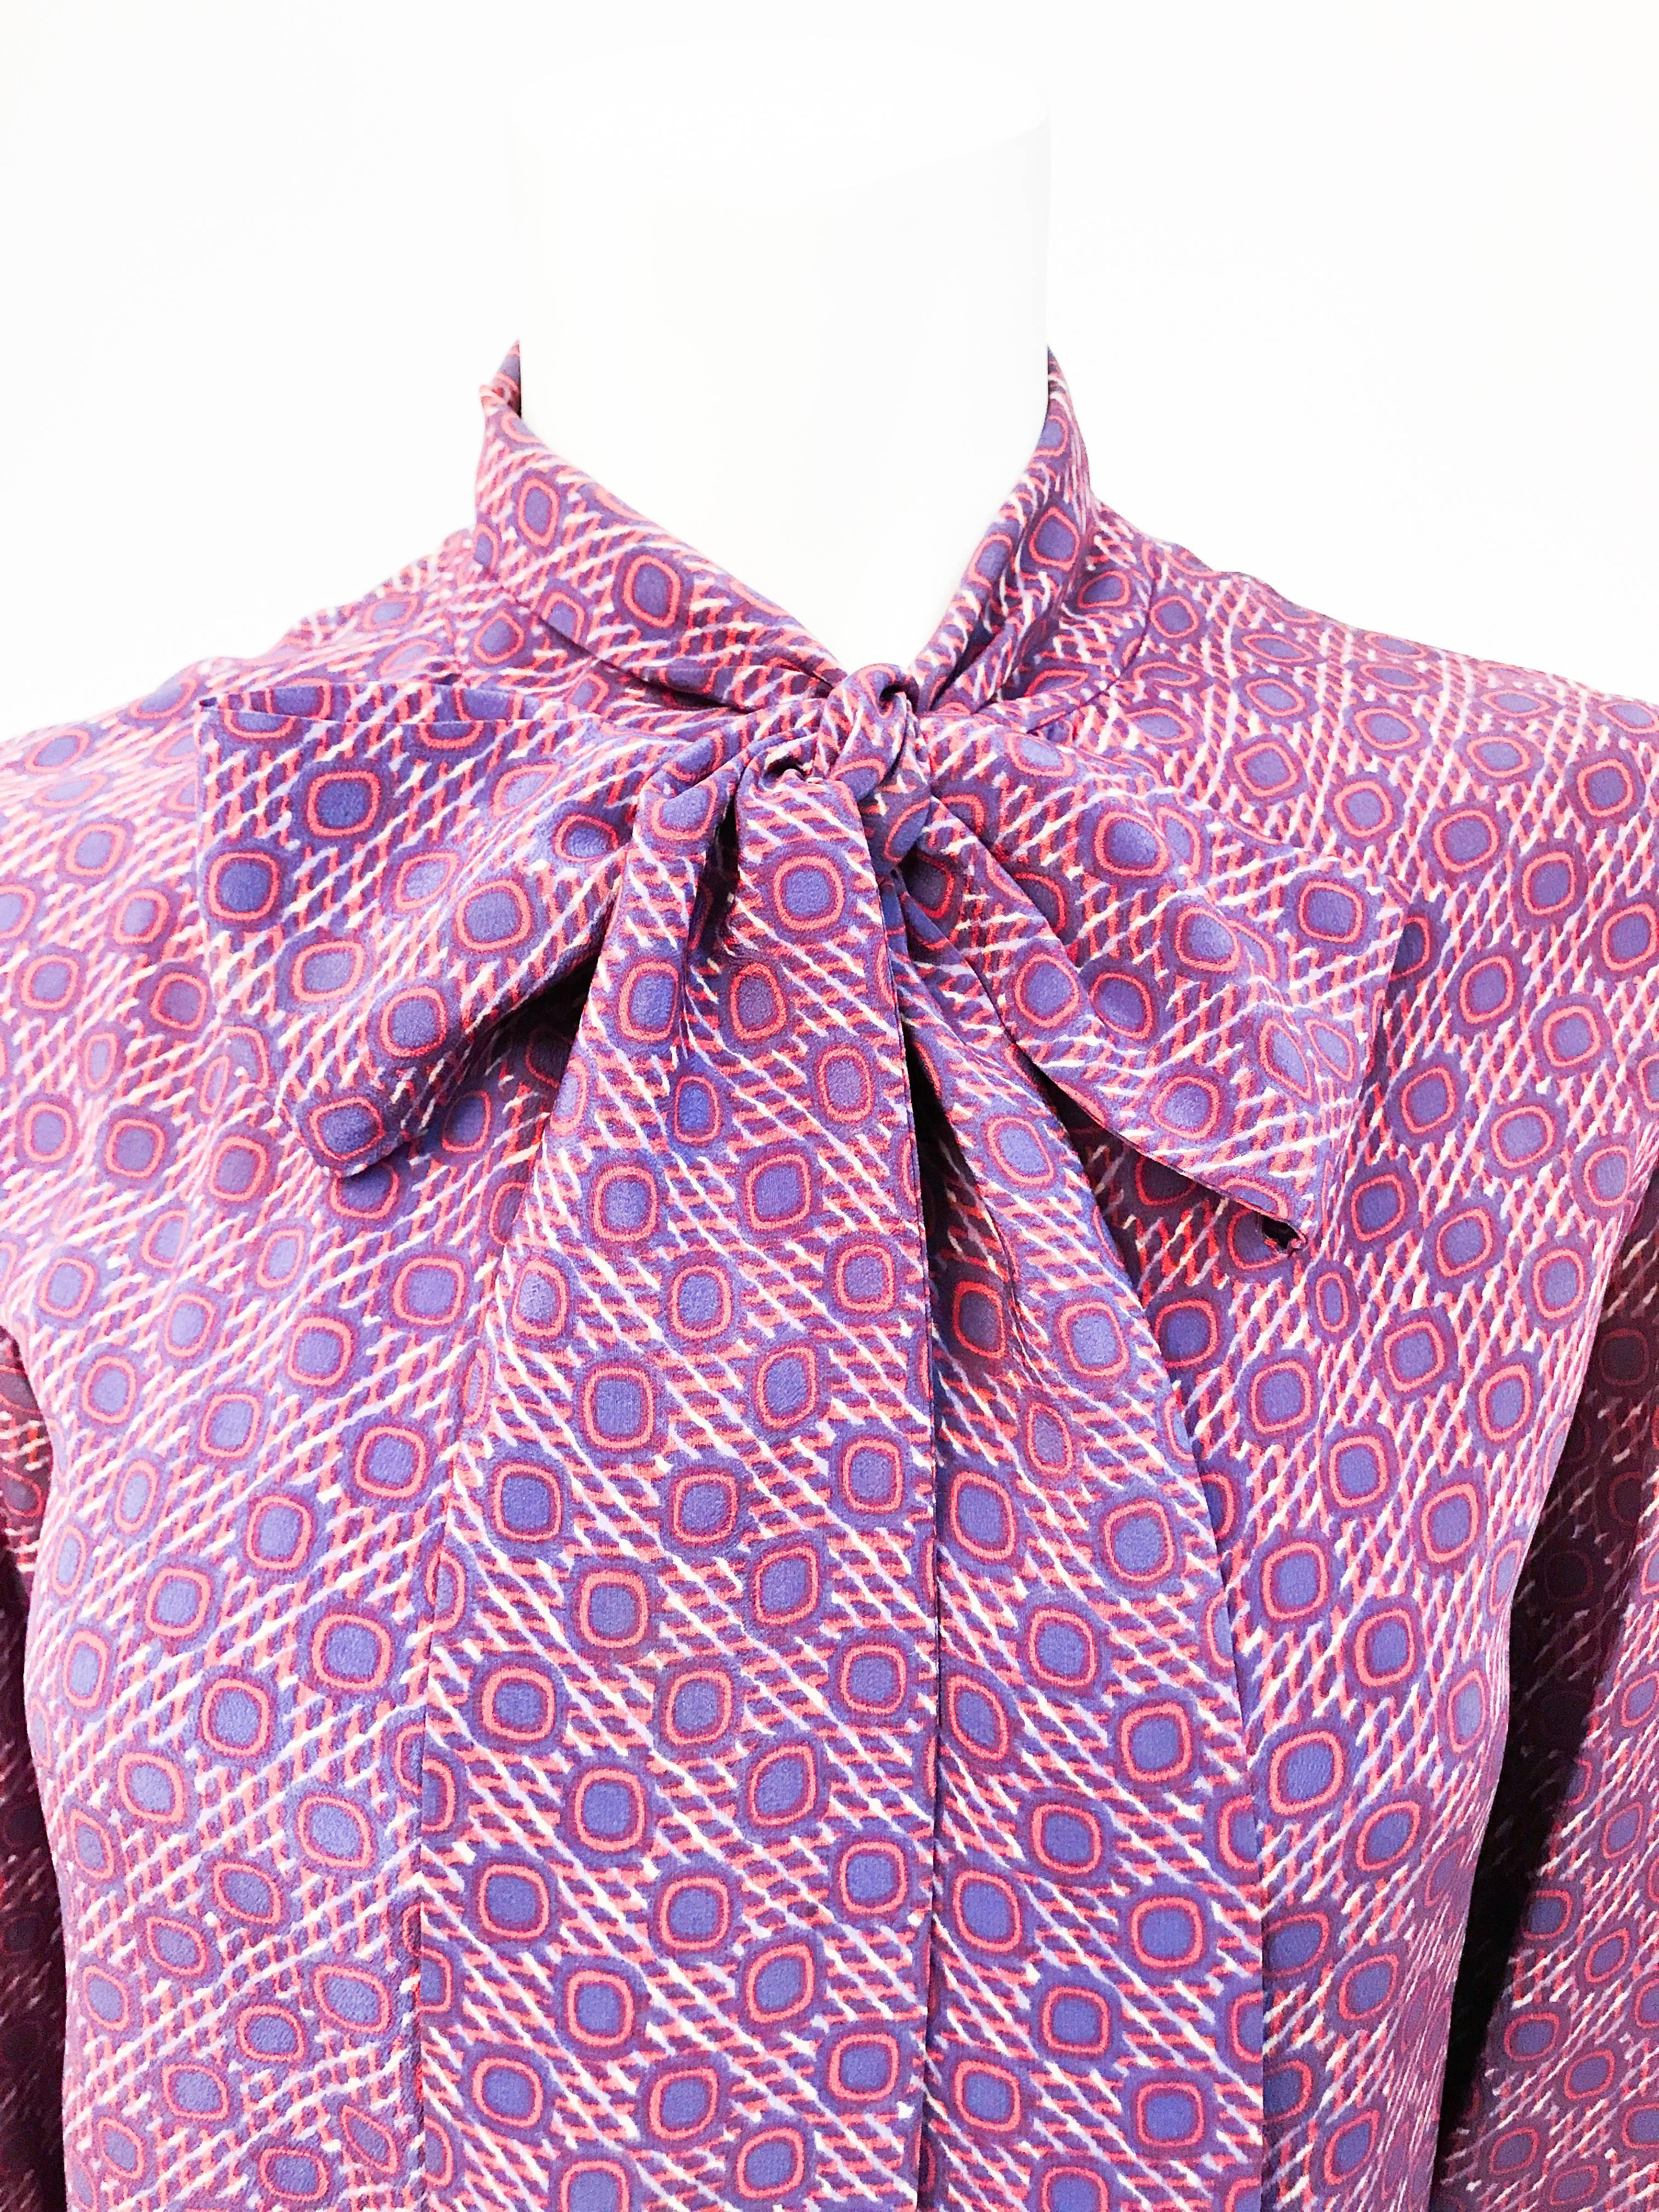 1970s Chanel Silk Printed Blouse with Attached Scarf. Silk printed blouse with long attached scarf and mother of pearl buttons.